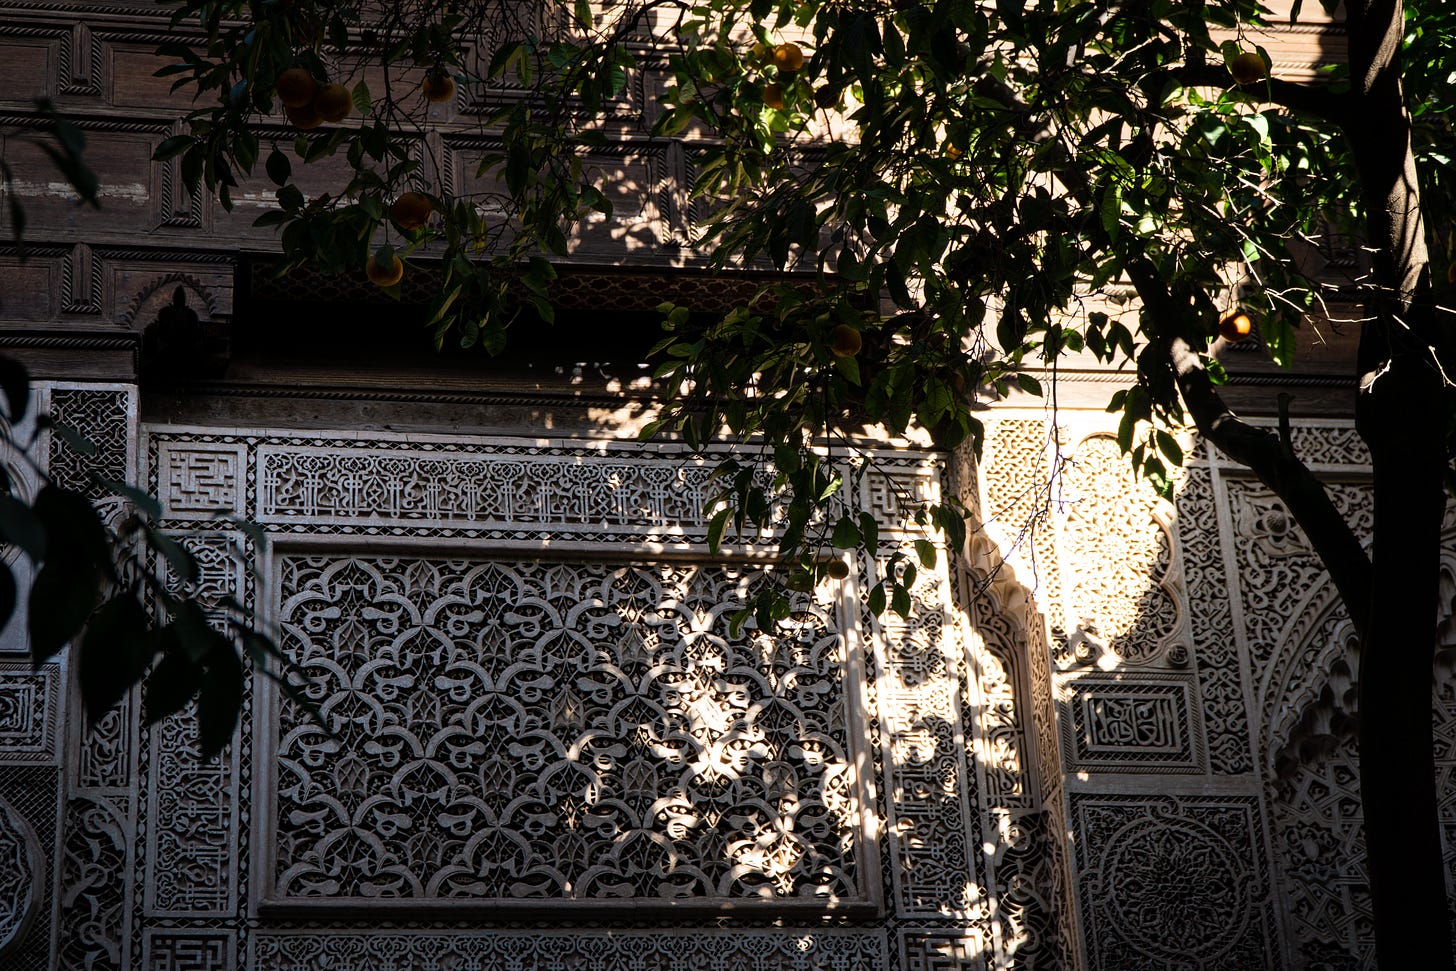 Shadows and sun playing on a courtyard wall carved in Islamic designs 